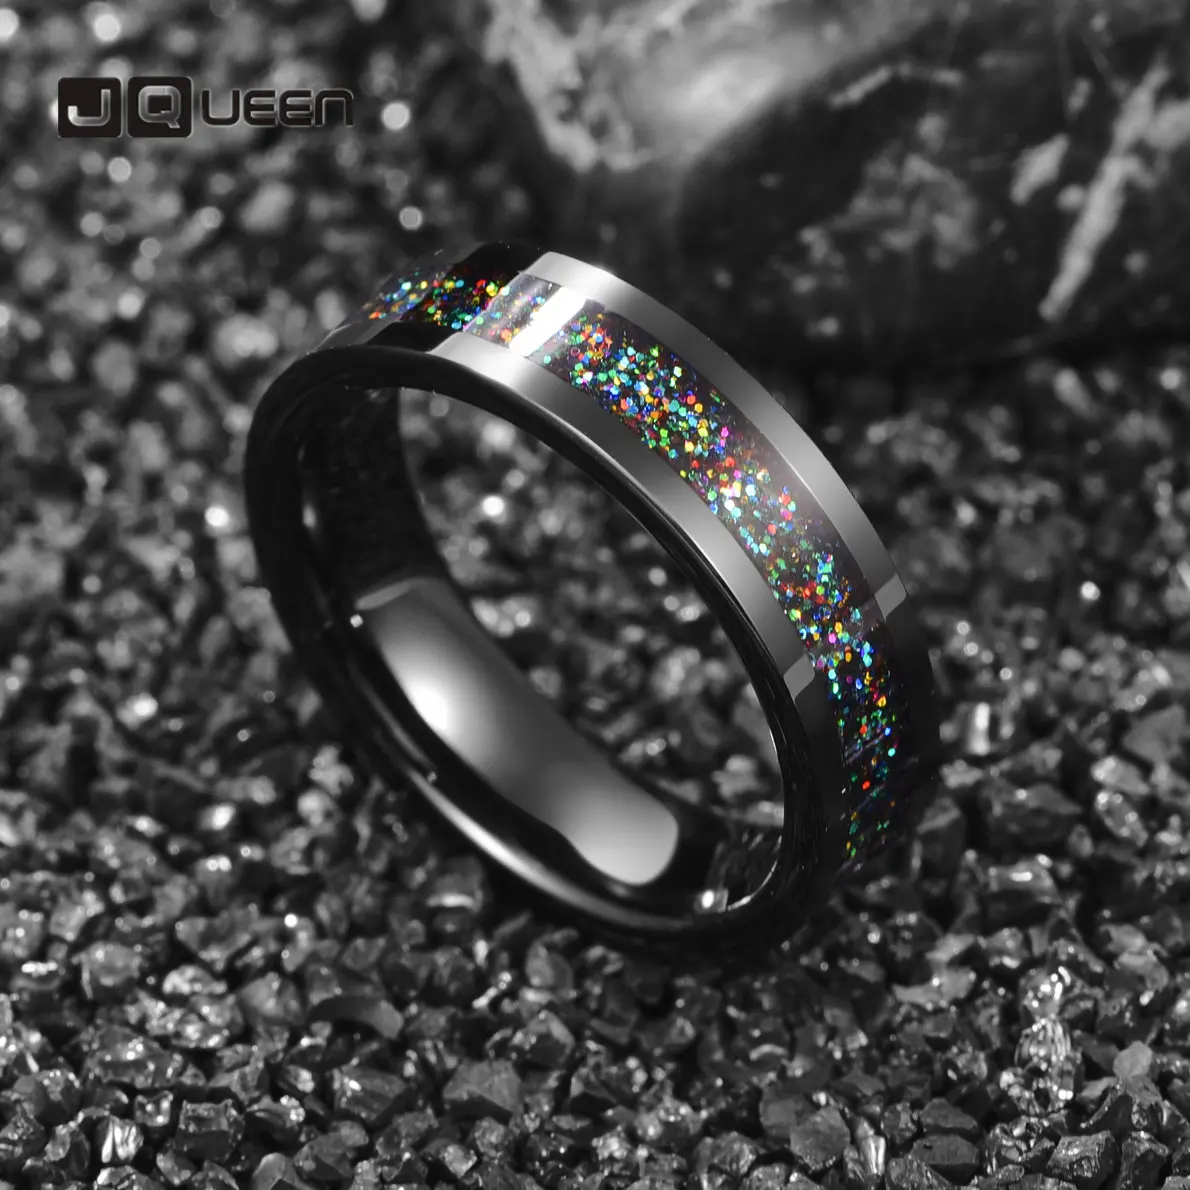 

JQUEEN 6mm Black Color Tungsten Carbide Ring Dome Polished Inlaid Pink Bling Powder Women's Wedding Ring Wedding Best Gift